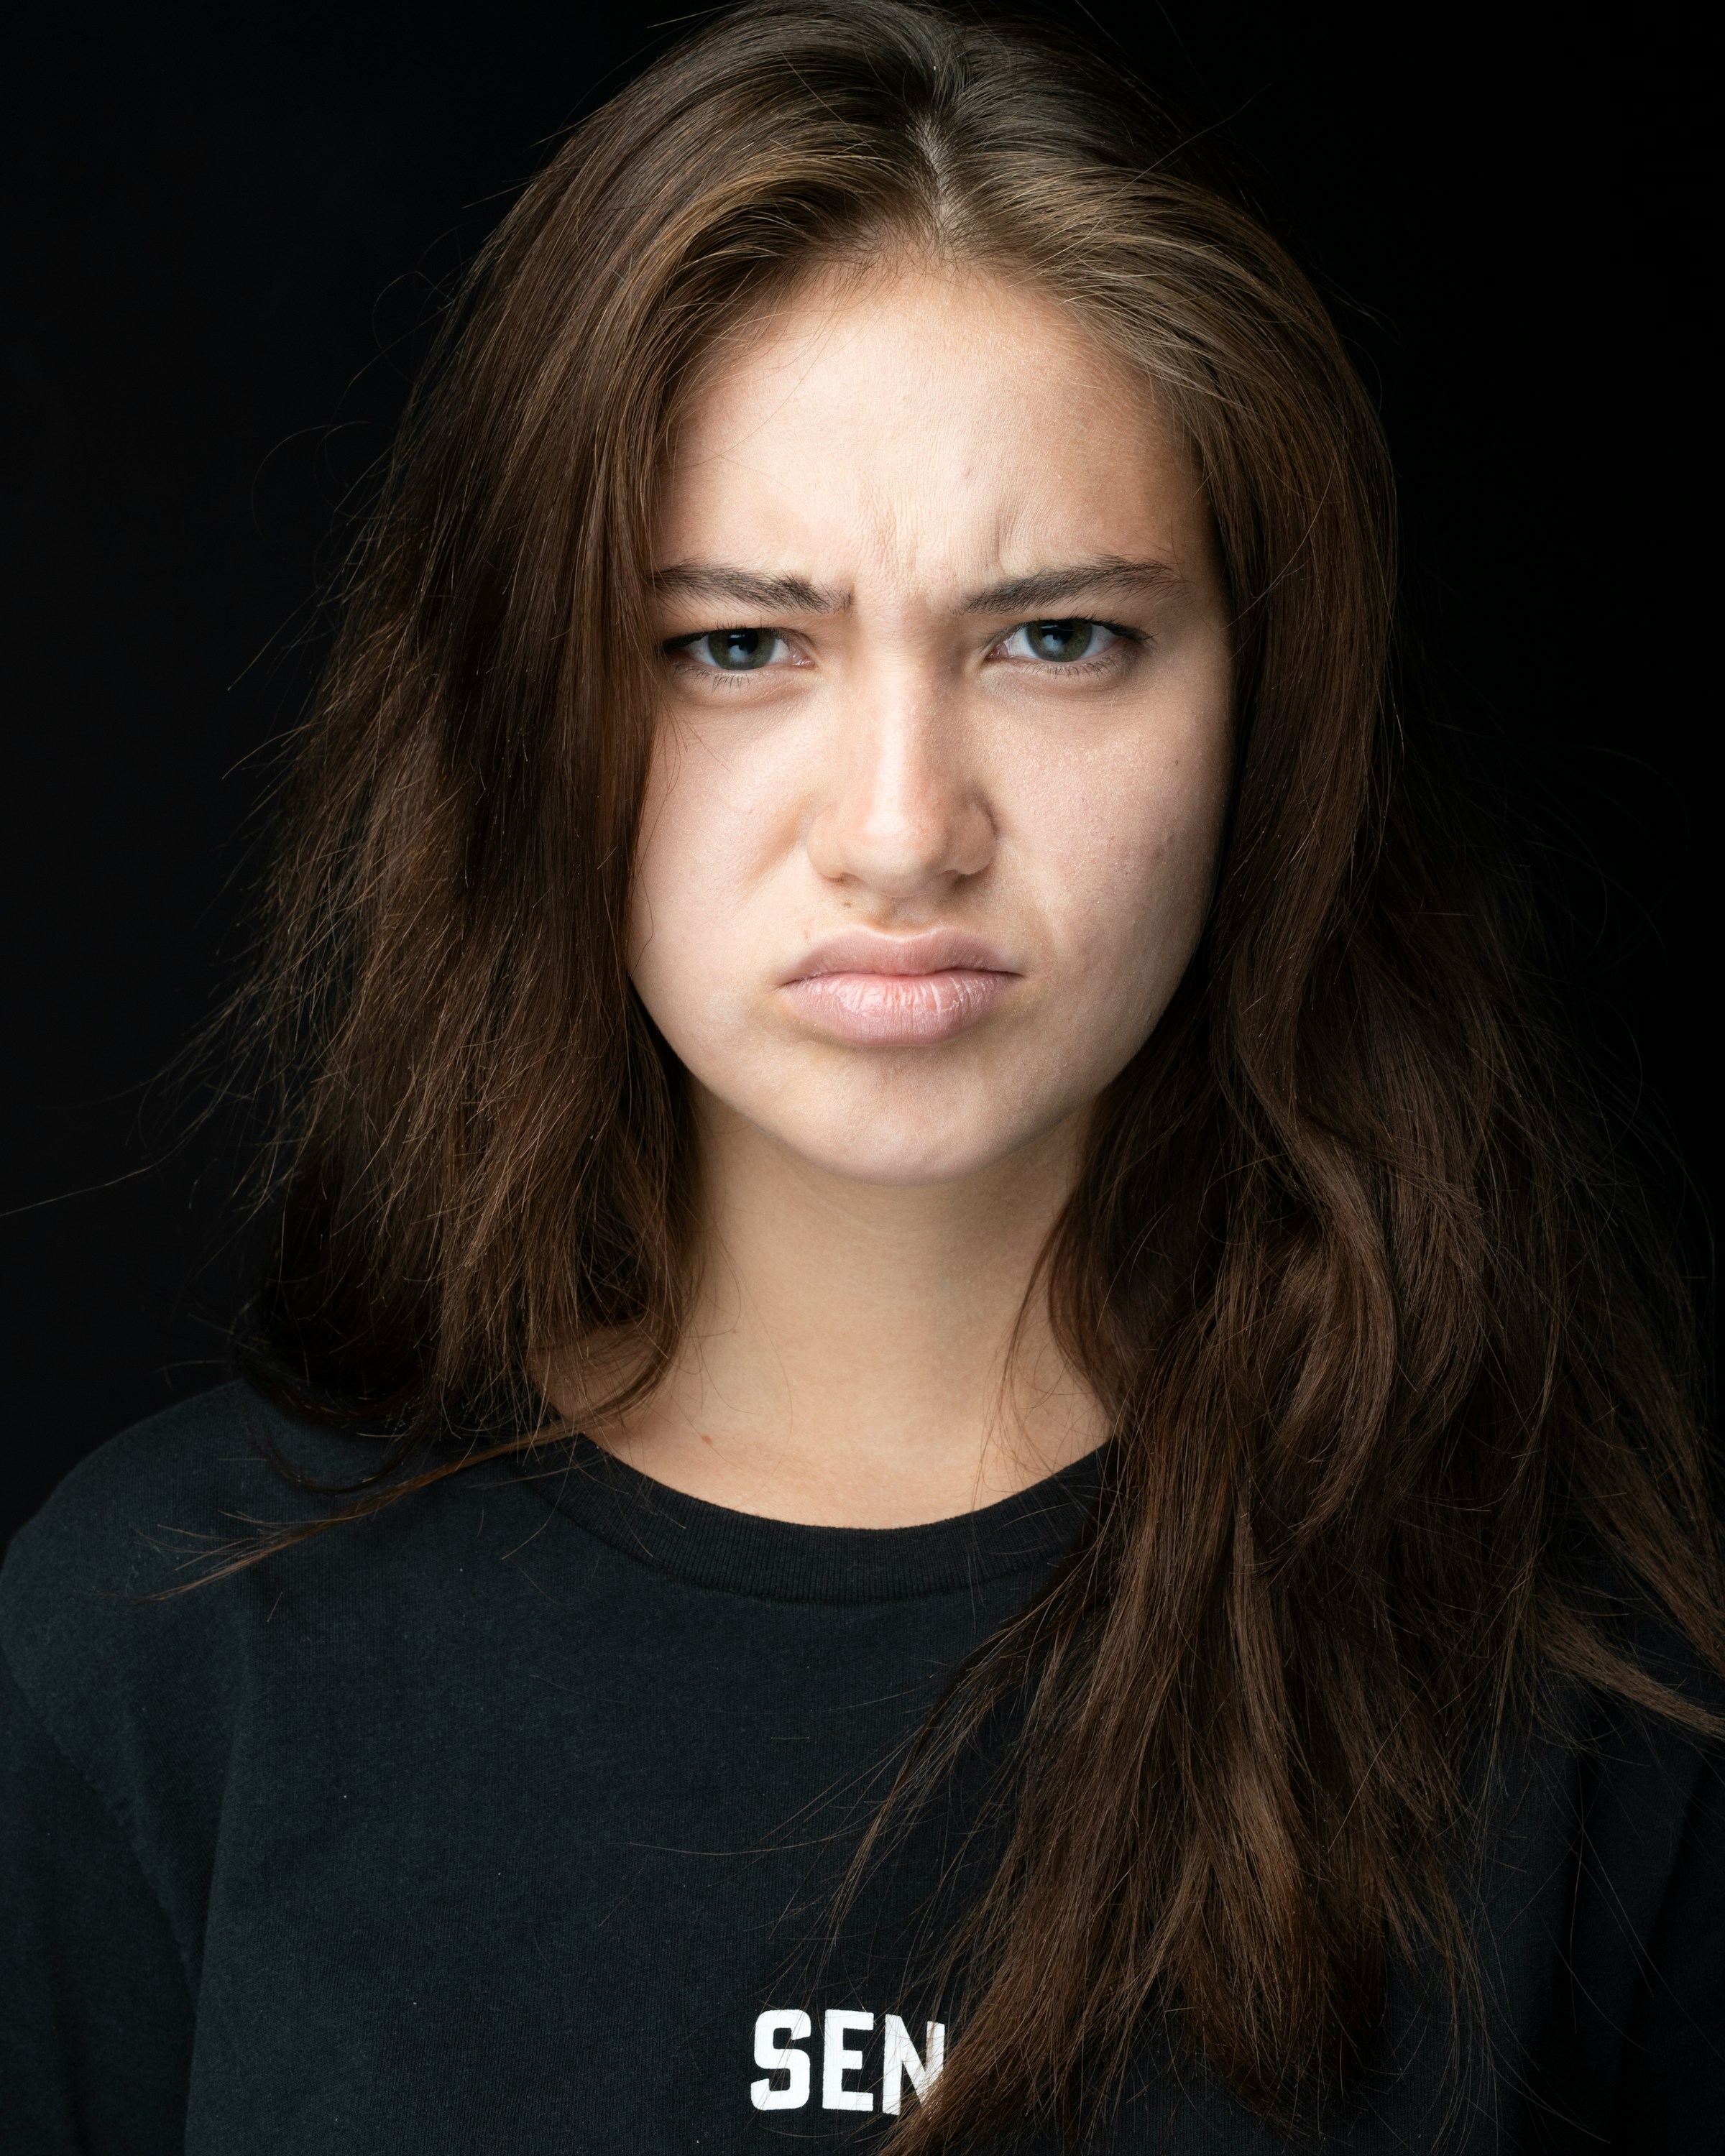 A frowning woman wearing black | Source: Unsplash